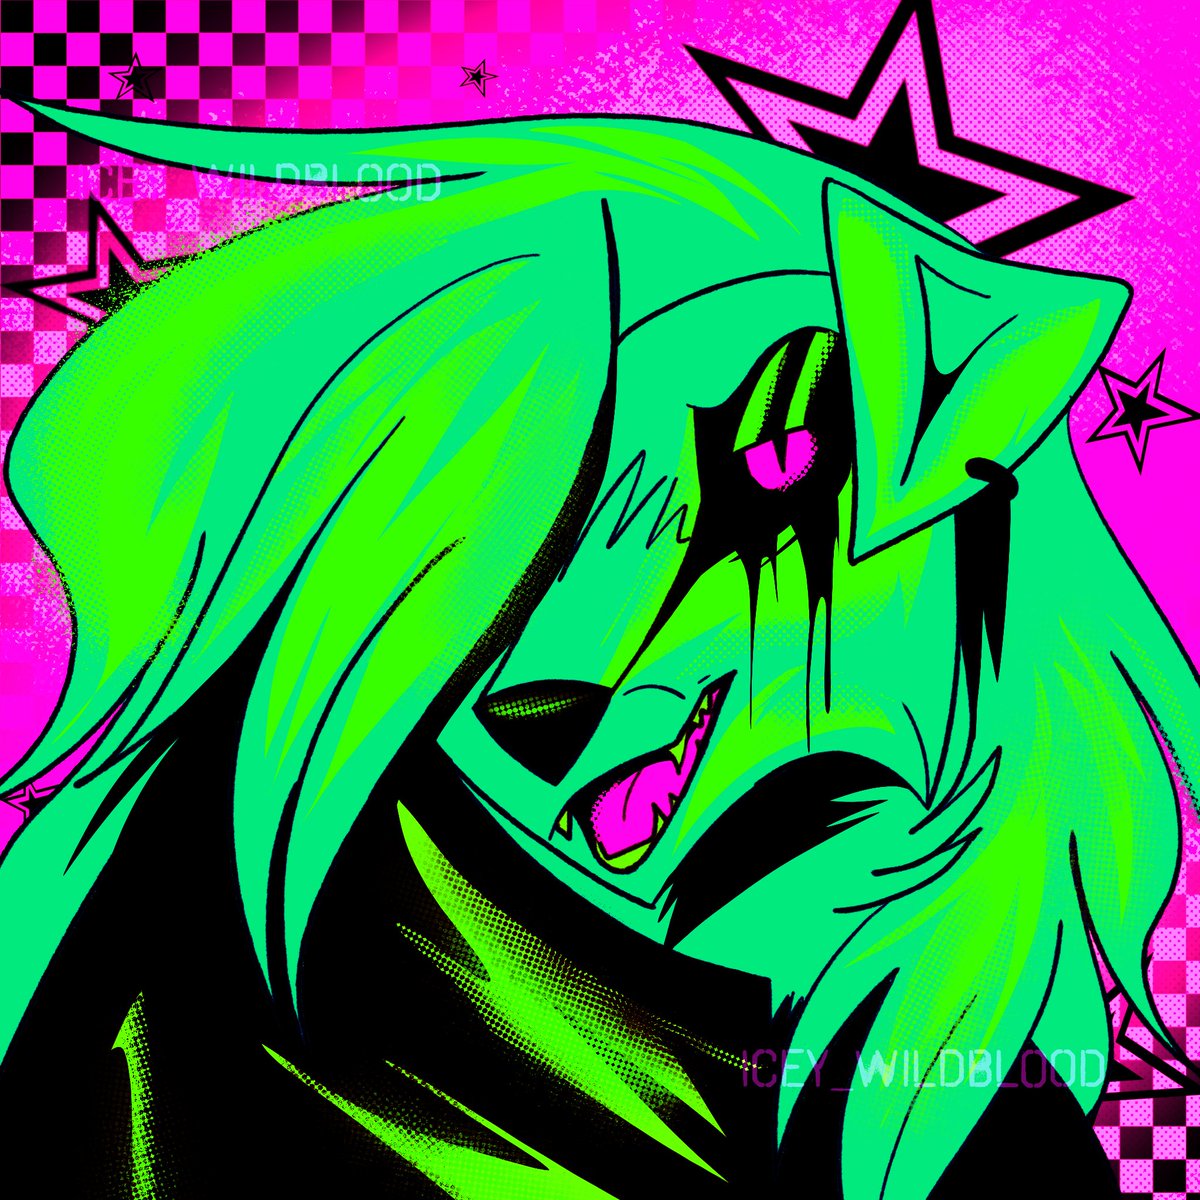 The colors were 🎨COLORING🎨 and i needed a new PFP 😎👌 love how this came out SO MUCH. 
-
#neon #colorpop #bright #art #neonart